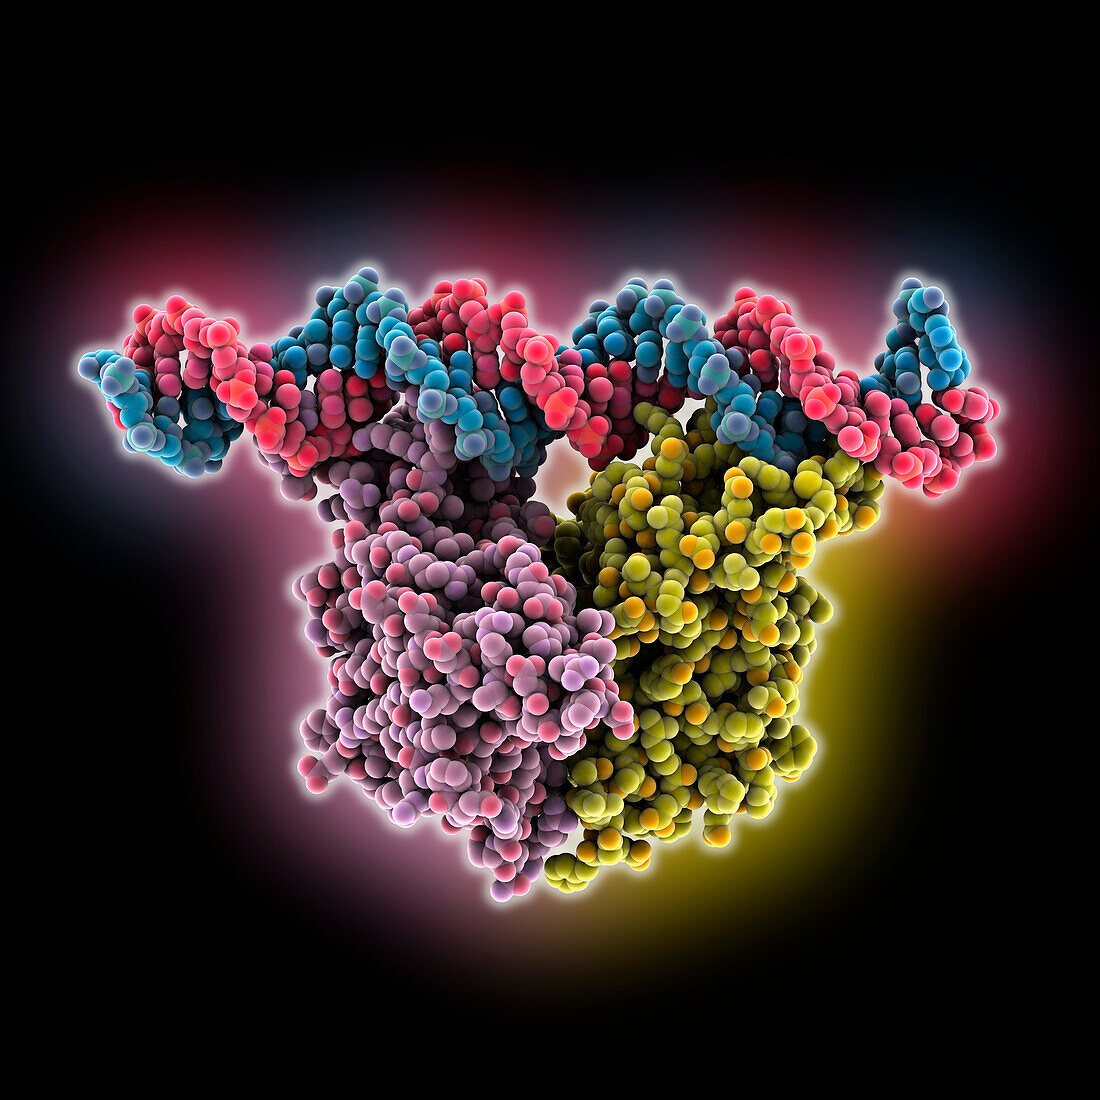 NADQ complexed with DNA, molecular model